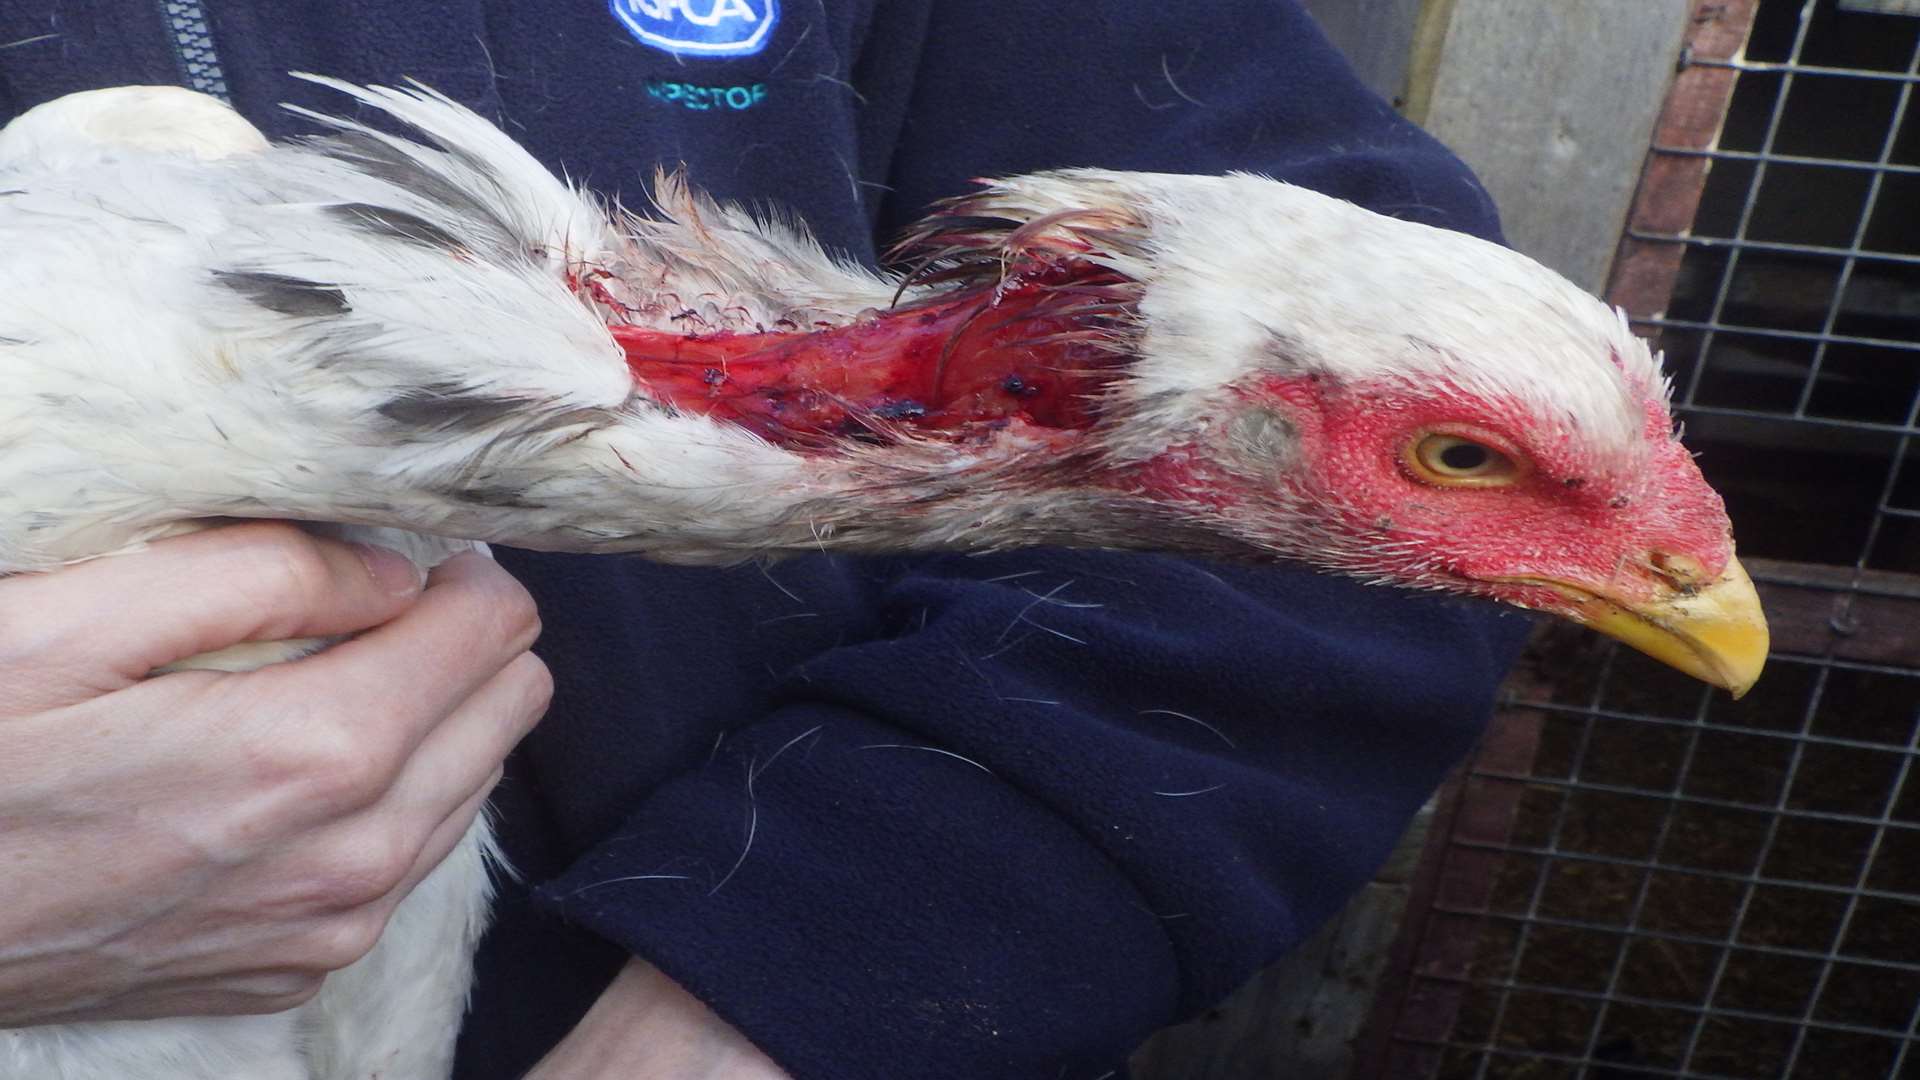 An injured hen found at the site